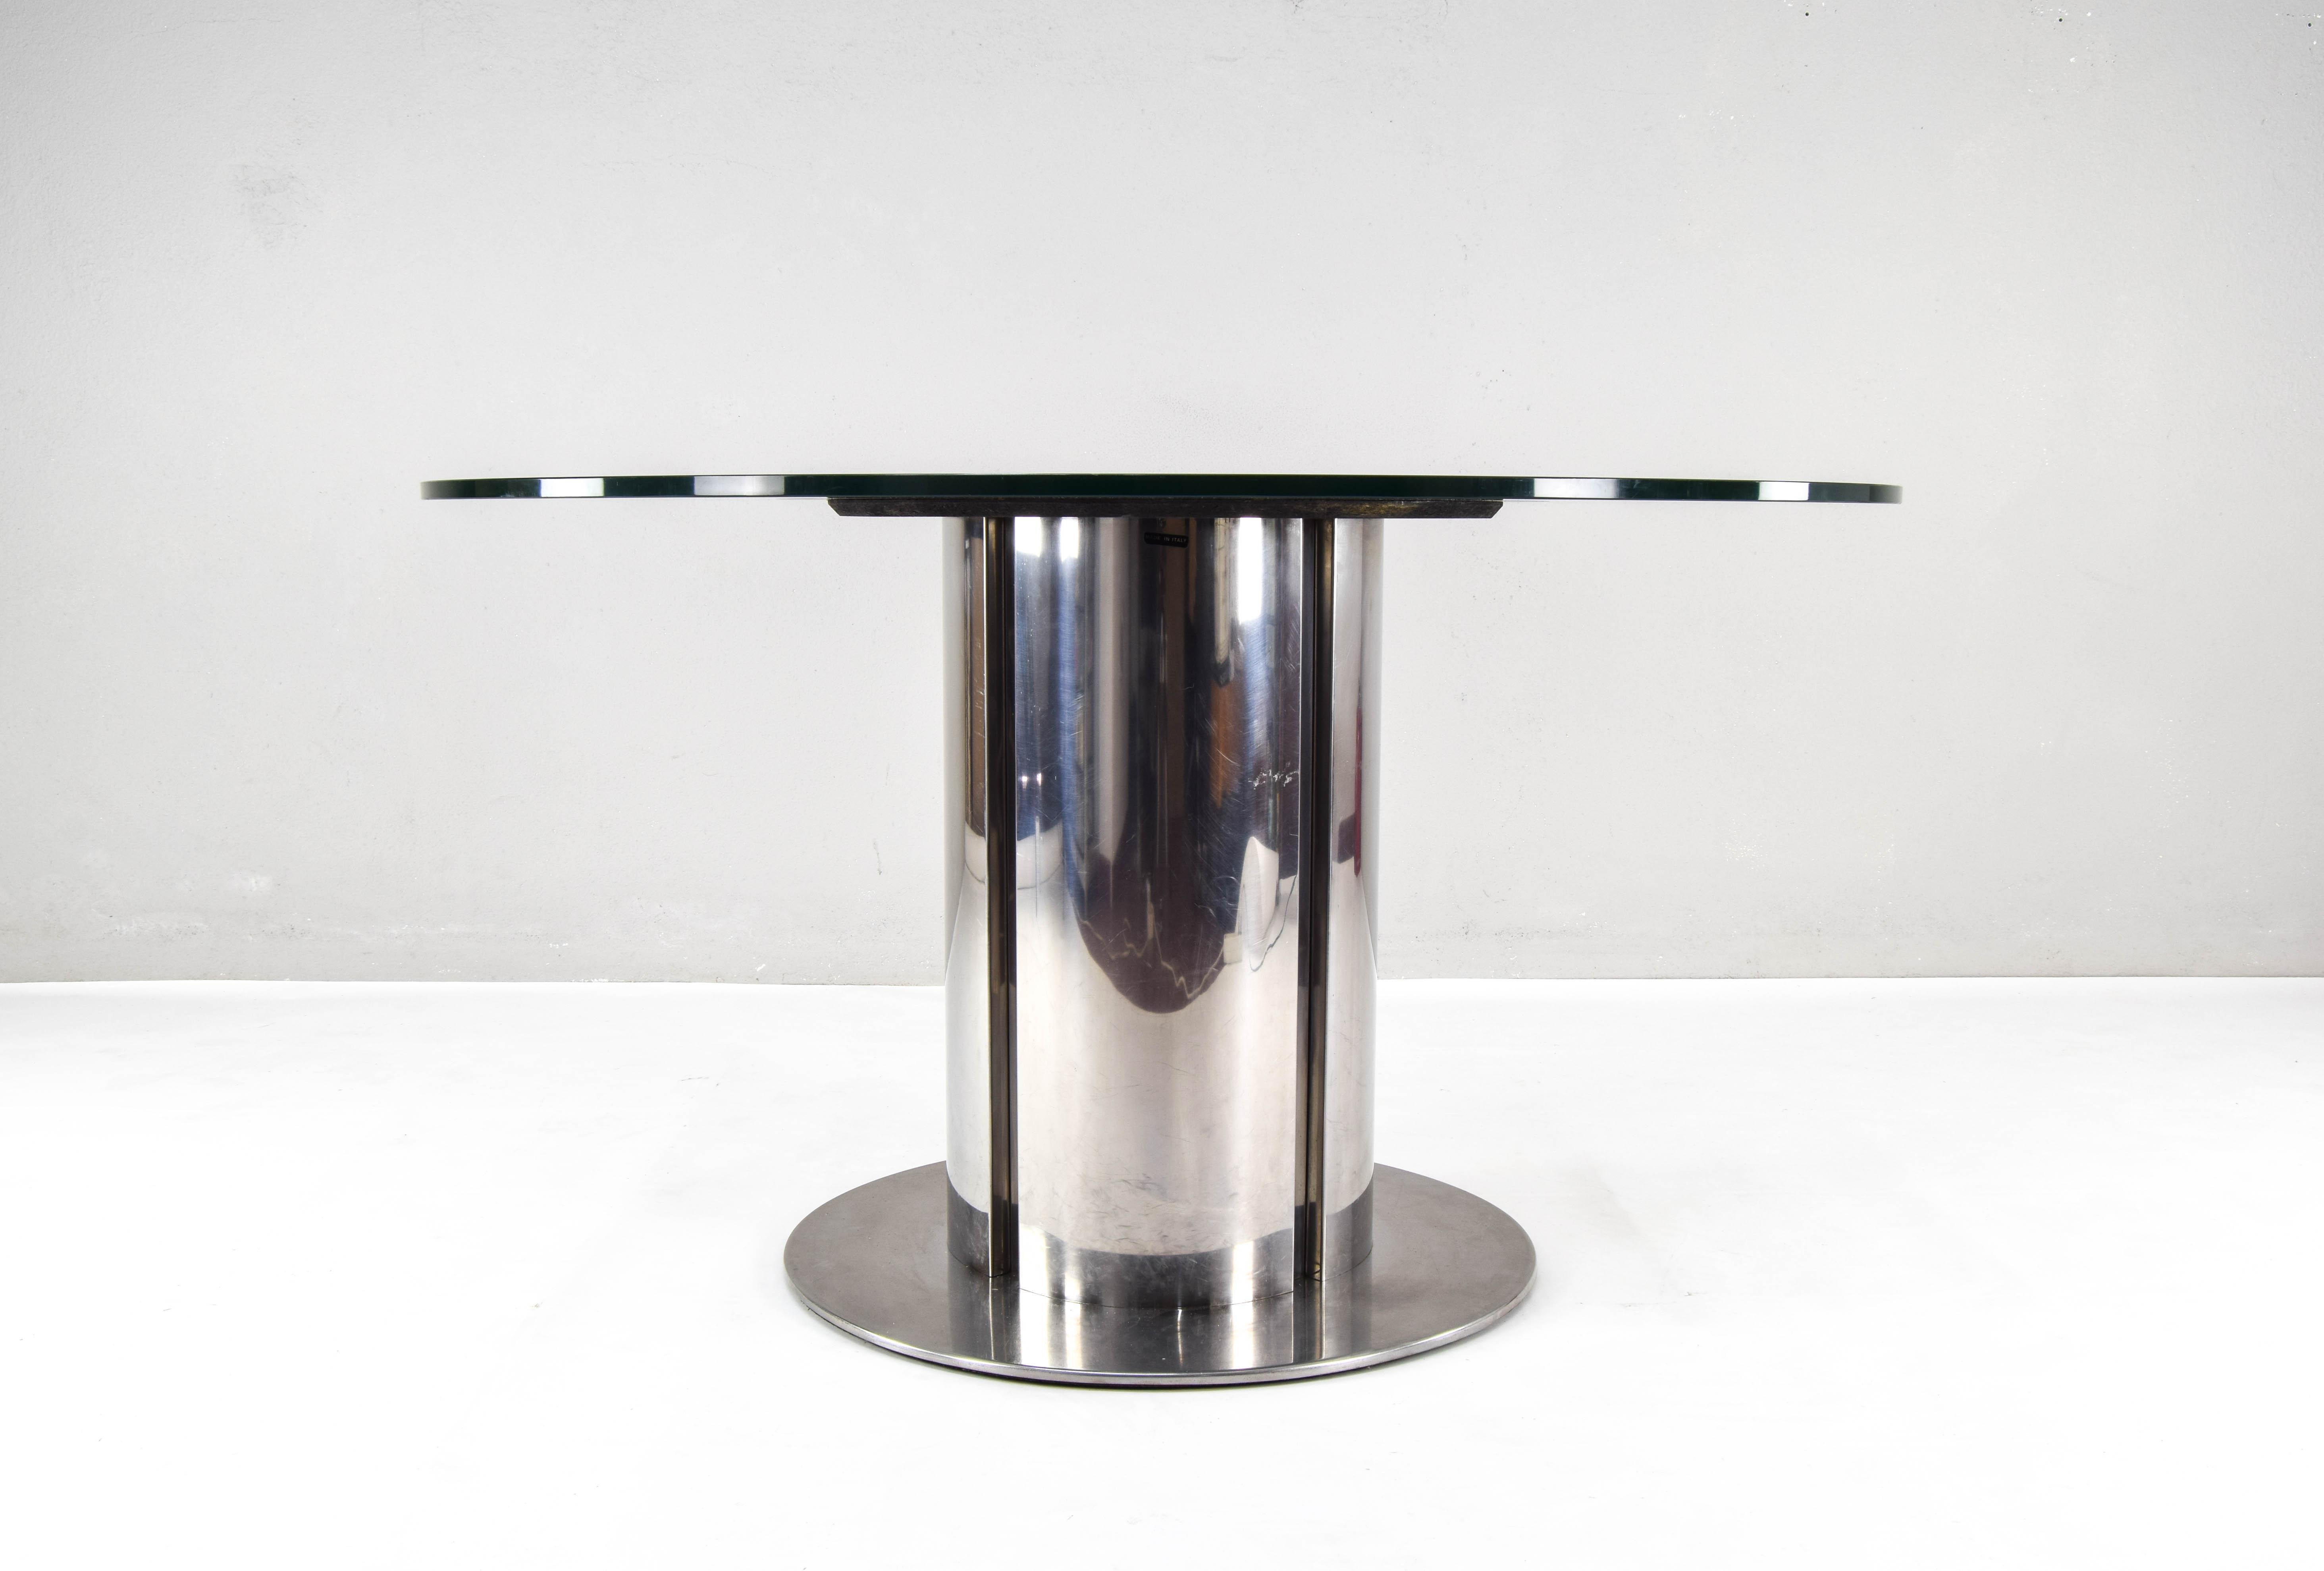 Singular Mid-Century Modern dining table designed by Antonia Astori in the 1960s and produced in Italy by the Cidue firm.
Cylindrical base in chromed steel, vice-sided glass top with a central circumference in a mirror finish.
With the exception